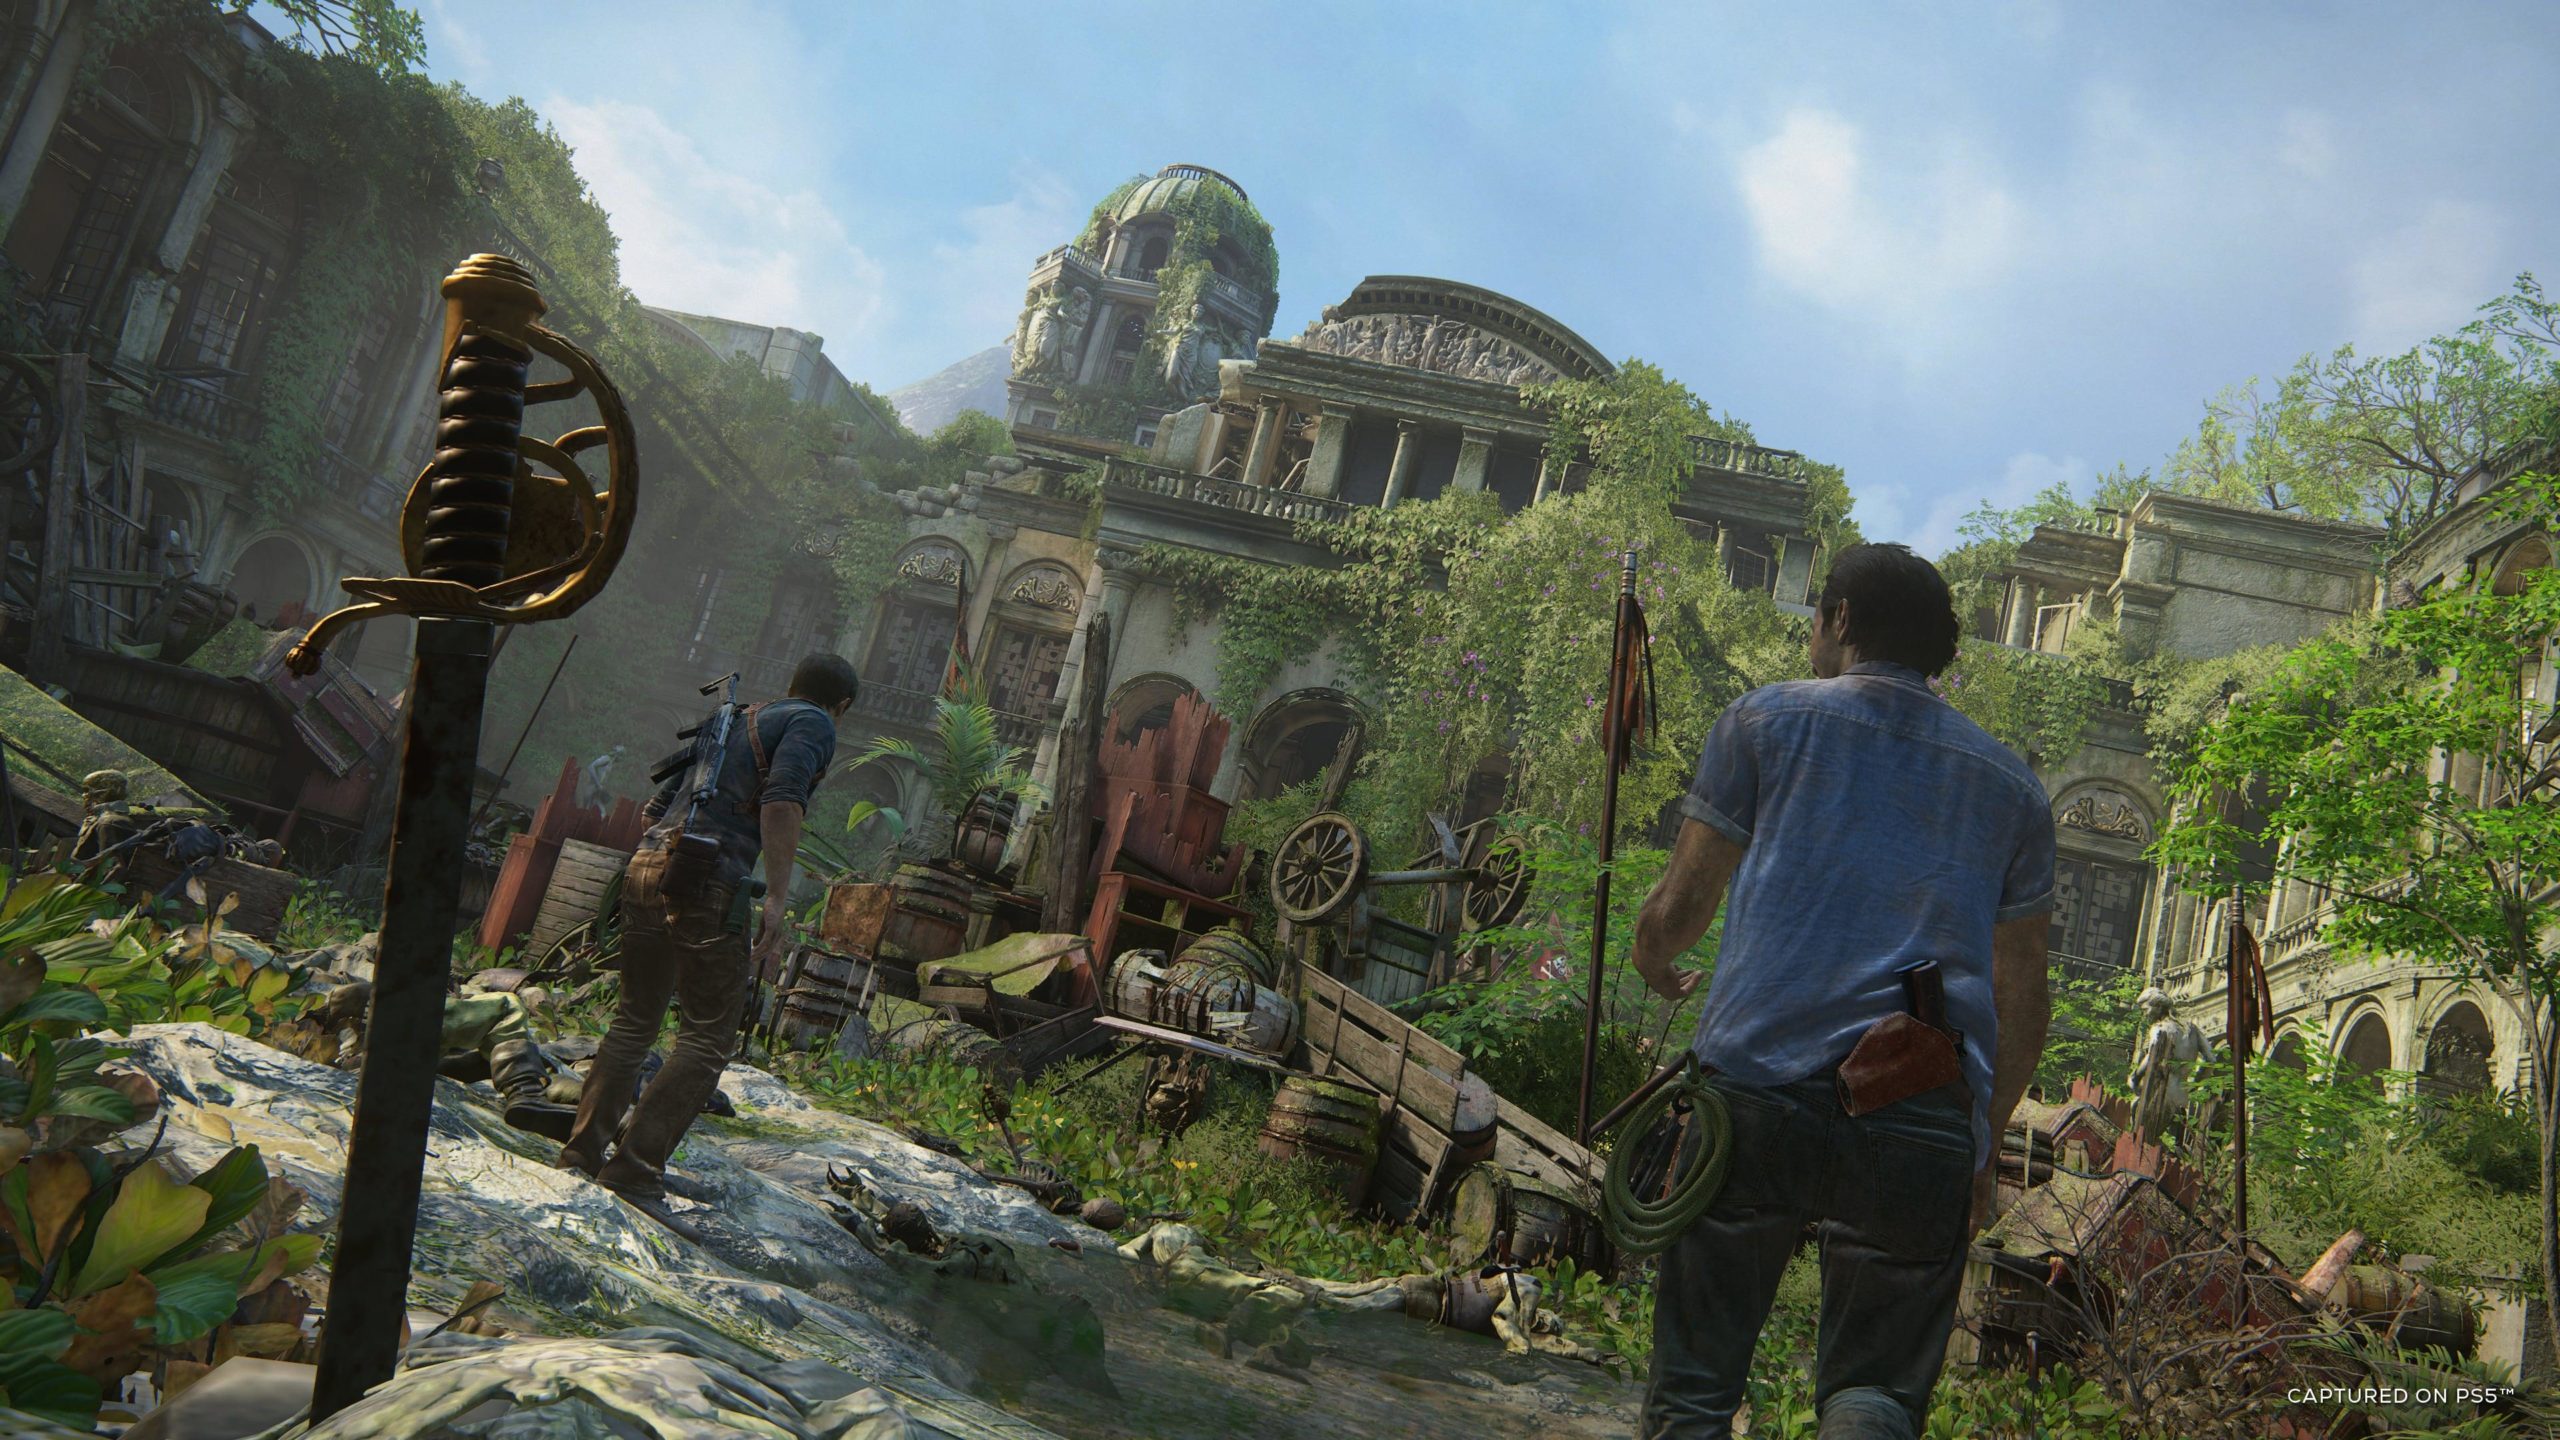 Uncharted: Legacy of Thieves Collection arrives on PC October 19, 2022 –  PlayStation.Blog